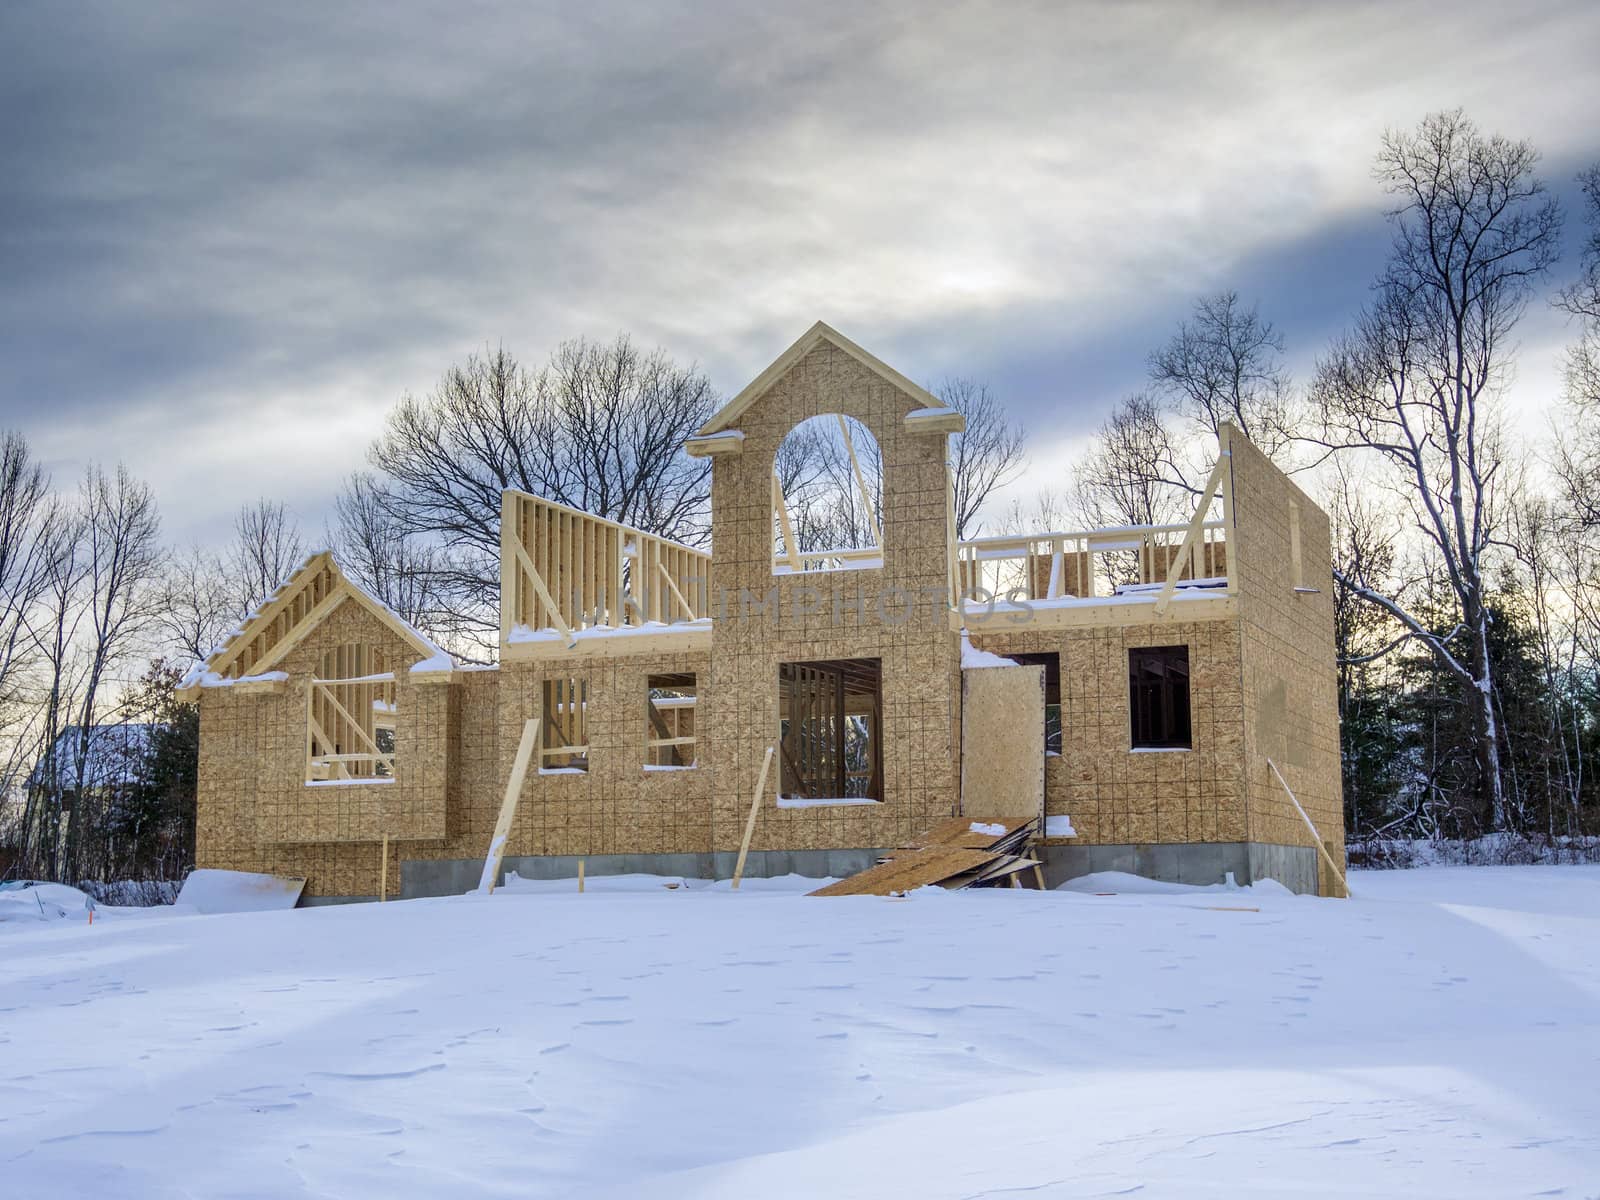 New house framing construction taking place in winter